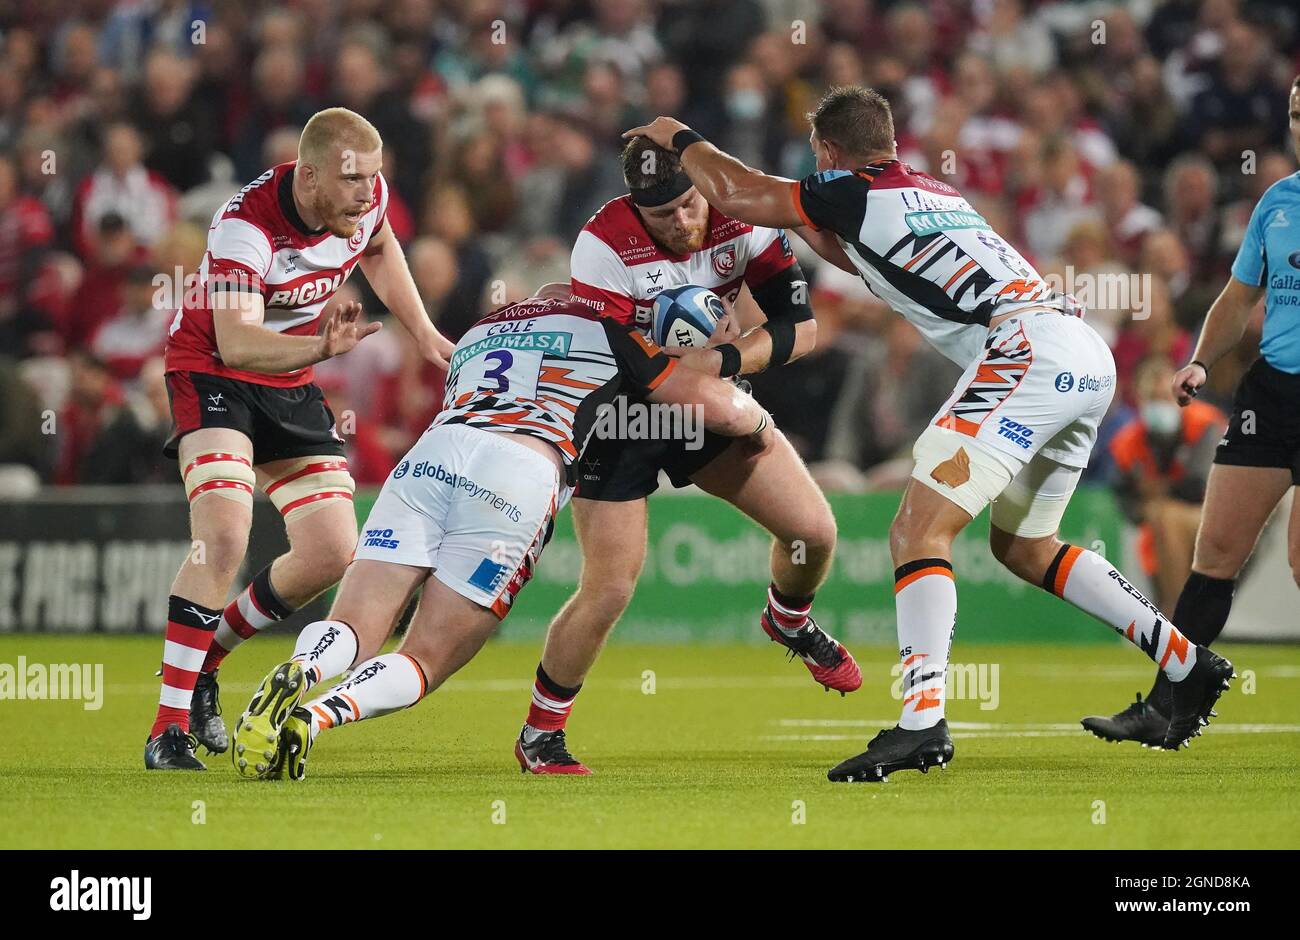 Gloucester's Harry Elrington is tackled by Leicester Tigers Hanro Liebenberg during the Gallagher Premiership match at the Kingsholm Stadium, Gloucester. Picture date: Friday September 24, 2021. Stock Photo